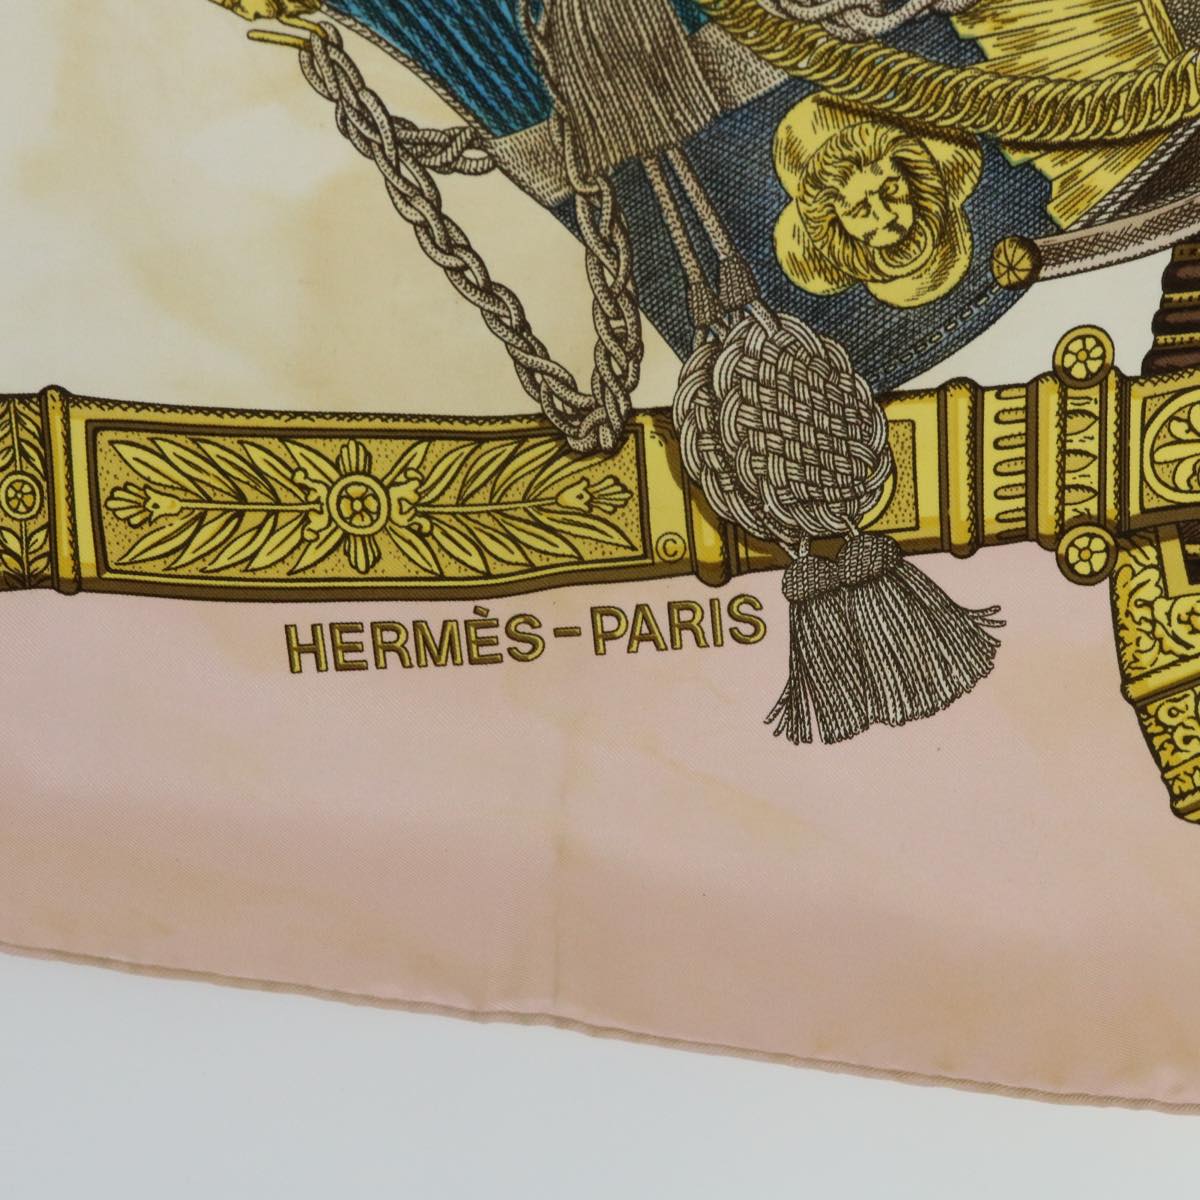 HERMES Carre 90 GRAND UNIFORME Scarf Silk Pink White Auth bs8065